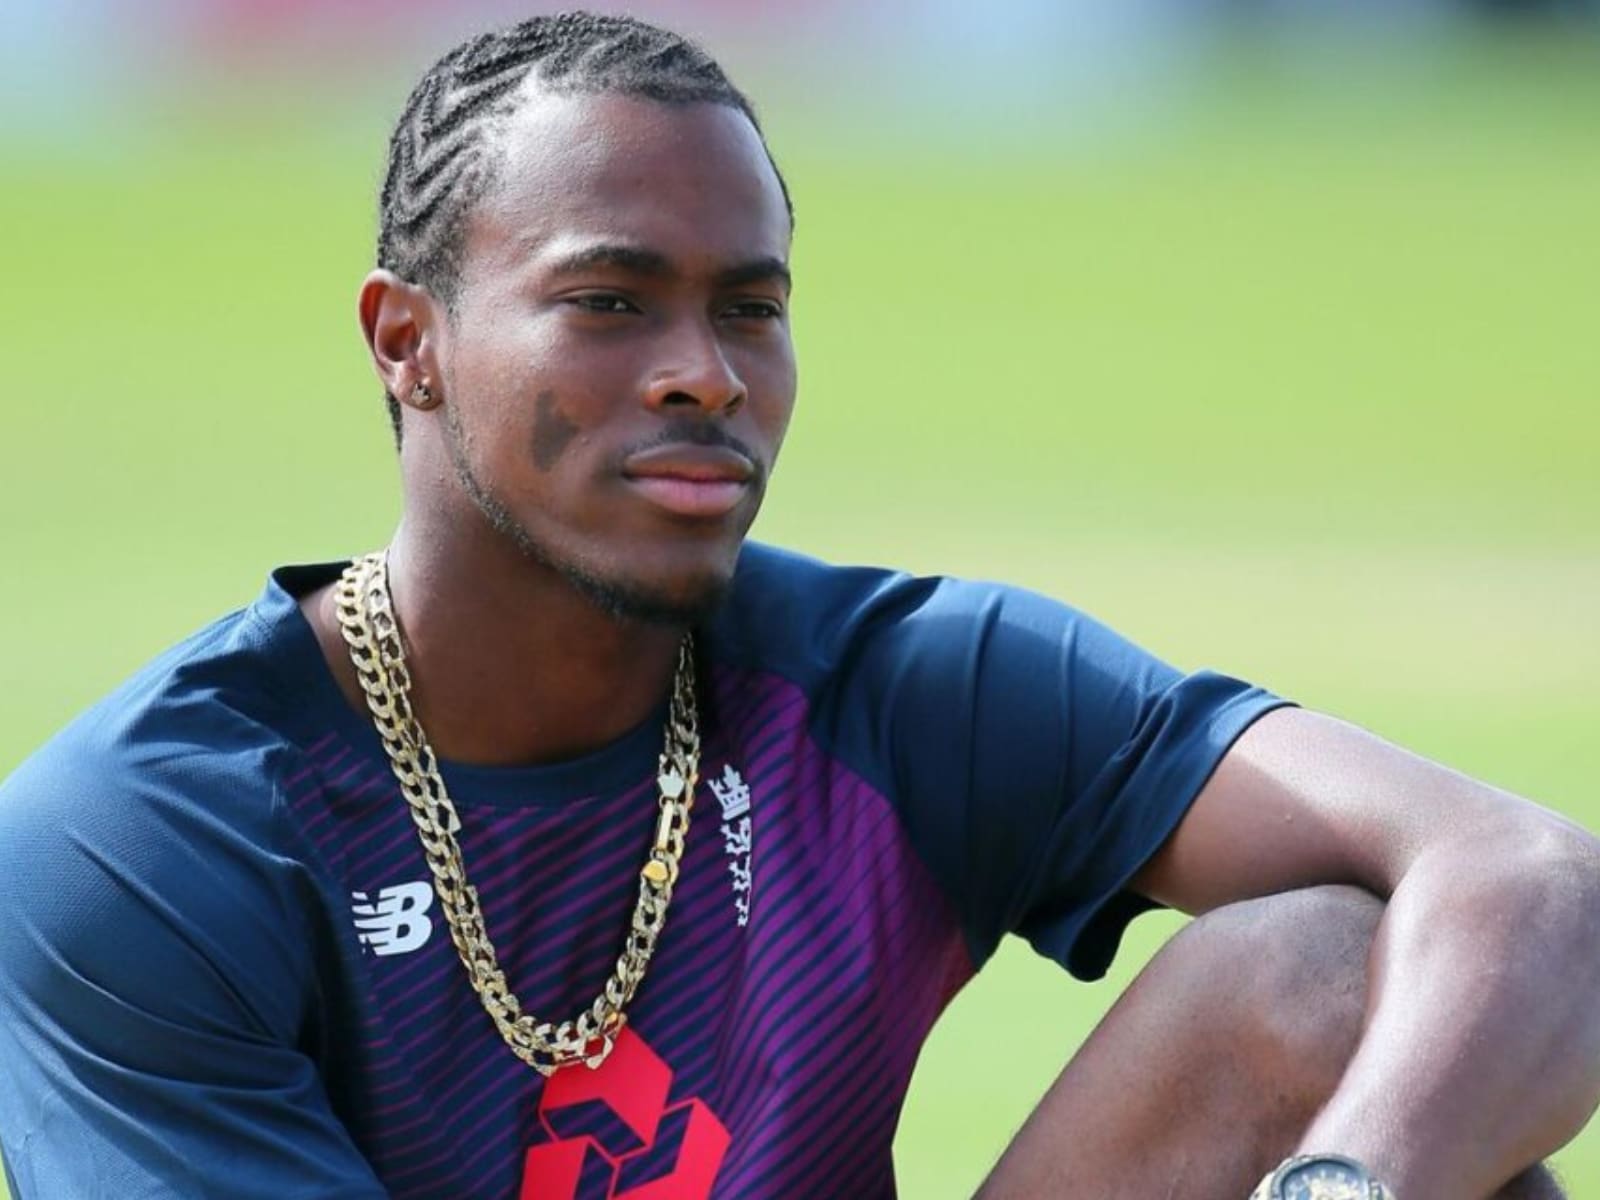 Sussex CCC - Congratulations to both ABIDINE SAKANDE and JOFRA ARCHER who  make their Sussex debuts against Pakistan Cricket Team today | Facebook